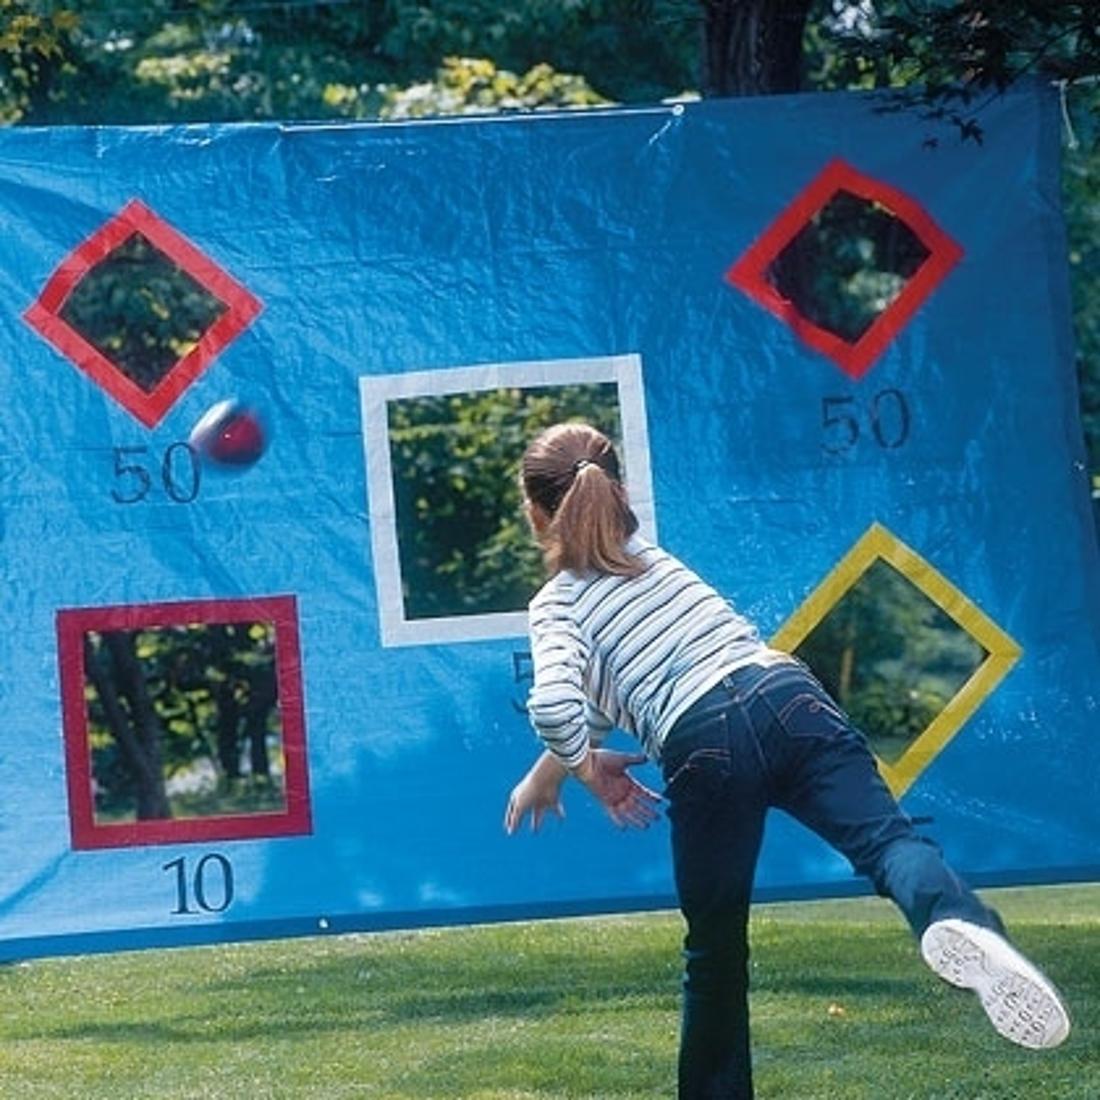 Hang a tarp between two trees and cut shapes out so the kids can practice their throwing motions.